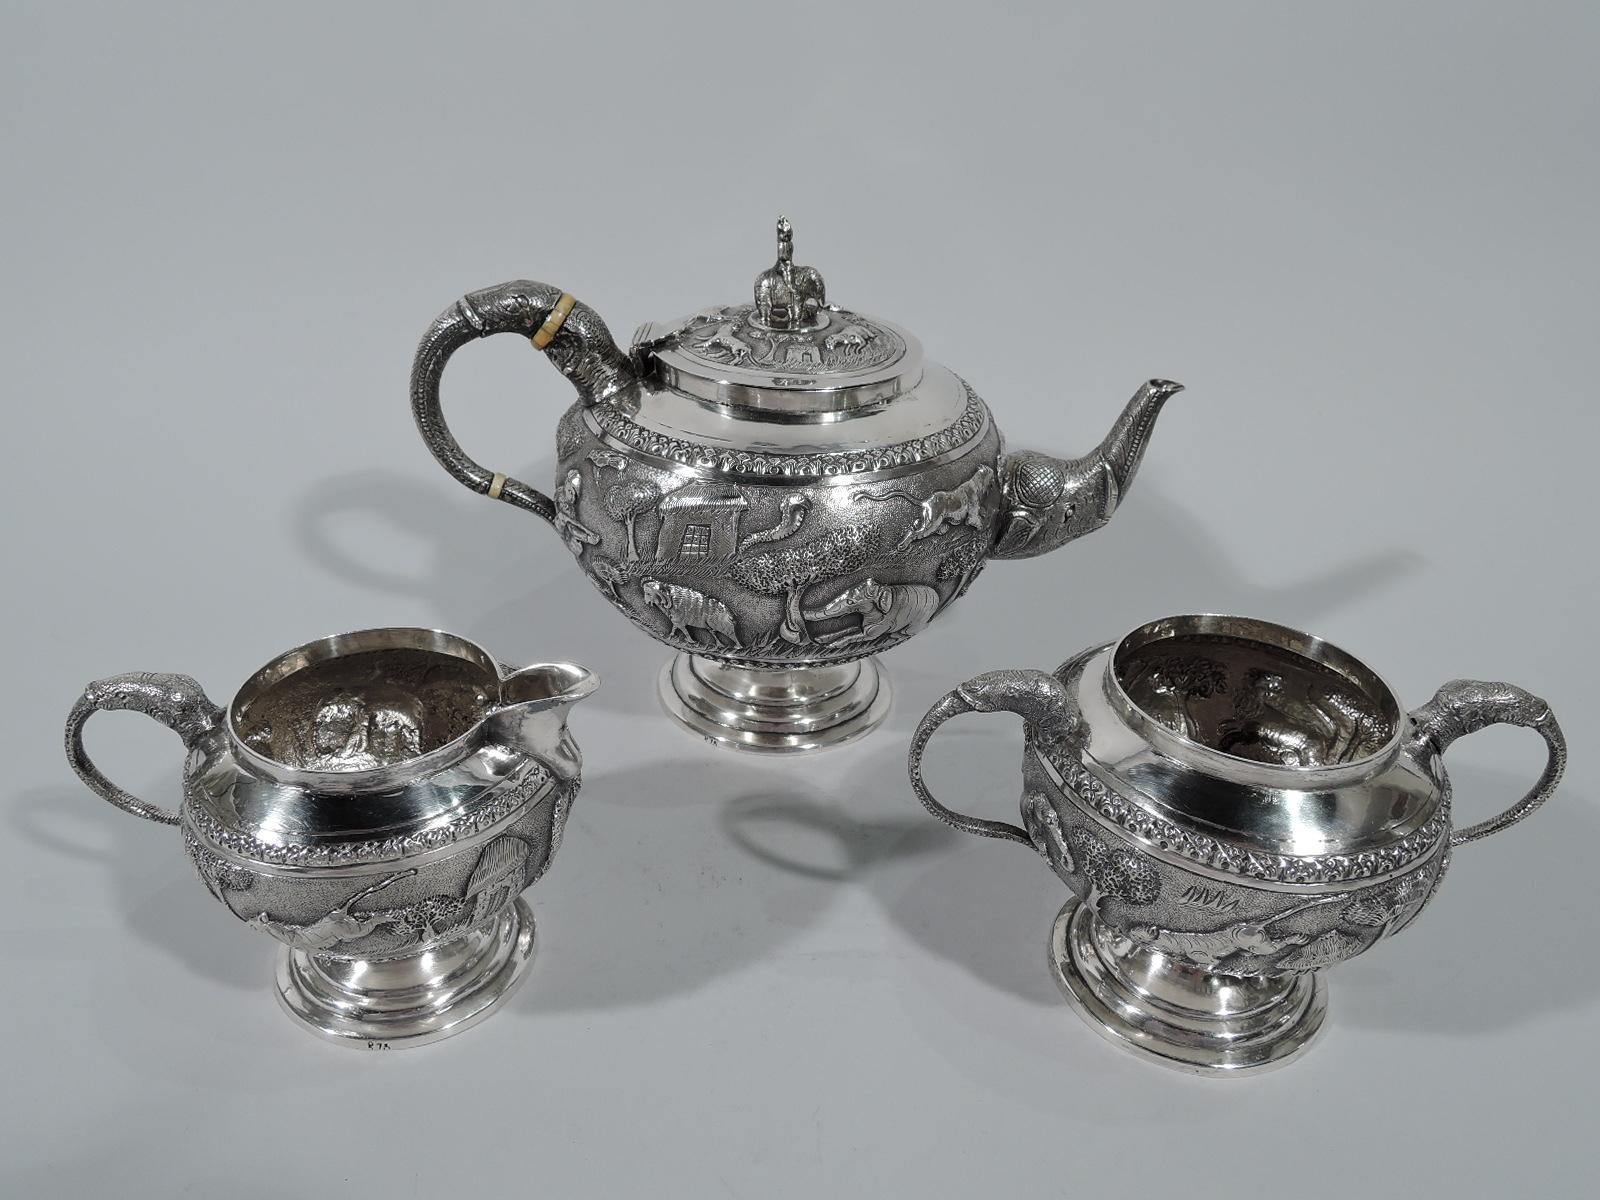 Antique Indian silver beast and man tea set. This set comprises teapot, creamer, and sugar.

Each: Globular body on stepped foot. Frieze with lions, boars, cobras, and elephants as well as native horsemen and hunters in a shadeless landscape of